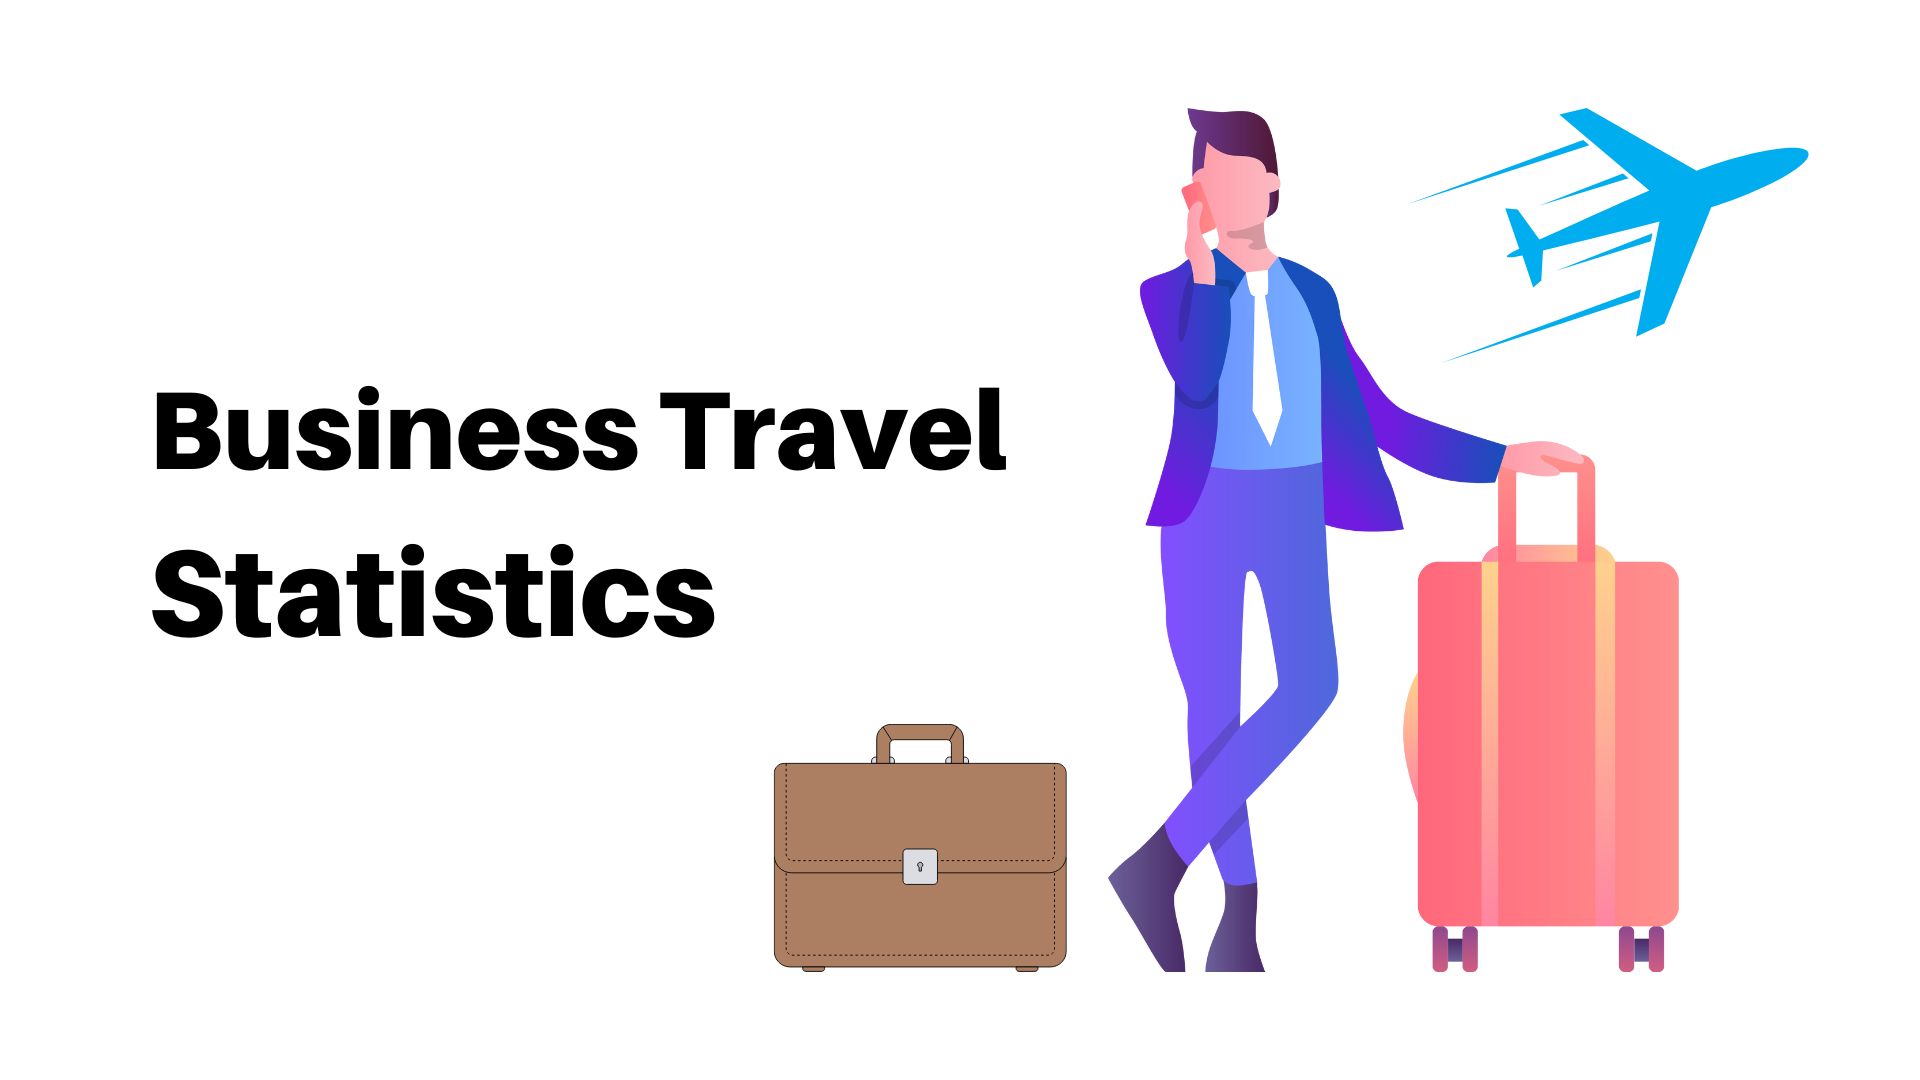 Business Travel Statistics By Industry and Business Size